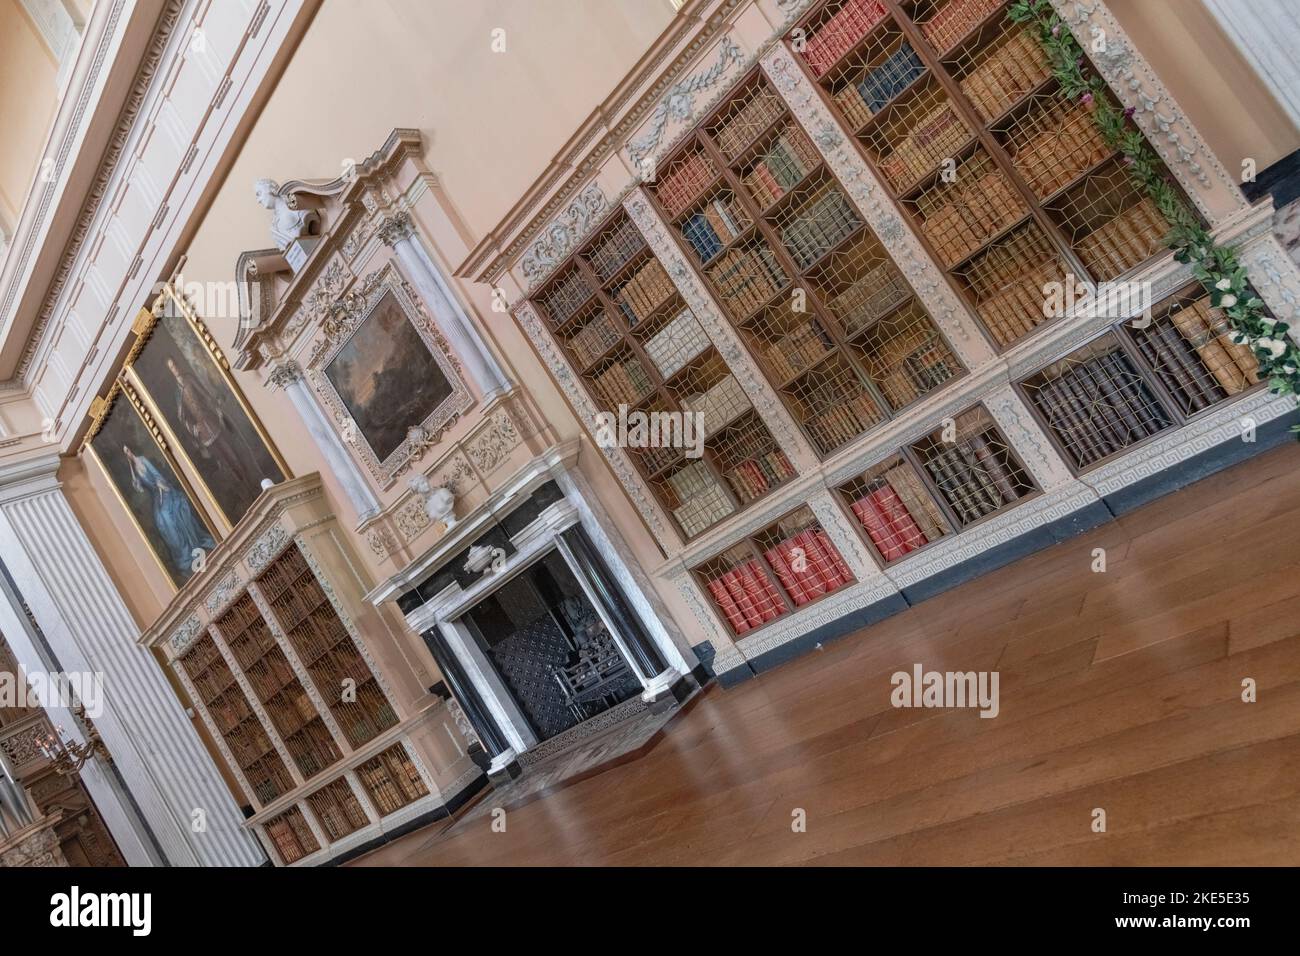 England, Oxfordshire, Woodstock, Blenheim Palace, The Long Library which was originally a picture gallery. Stock Photo